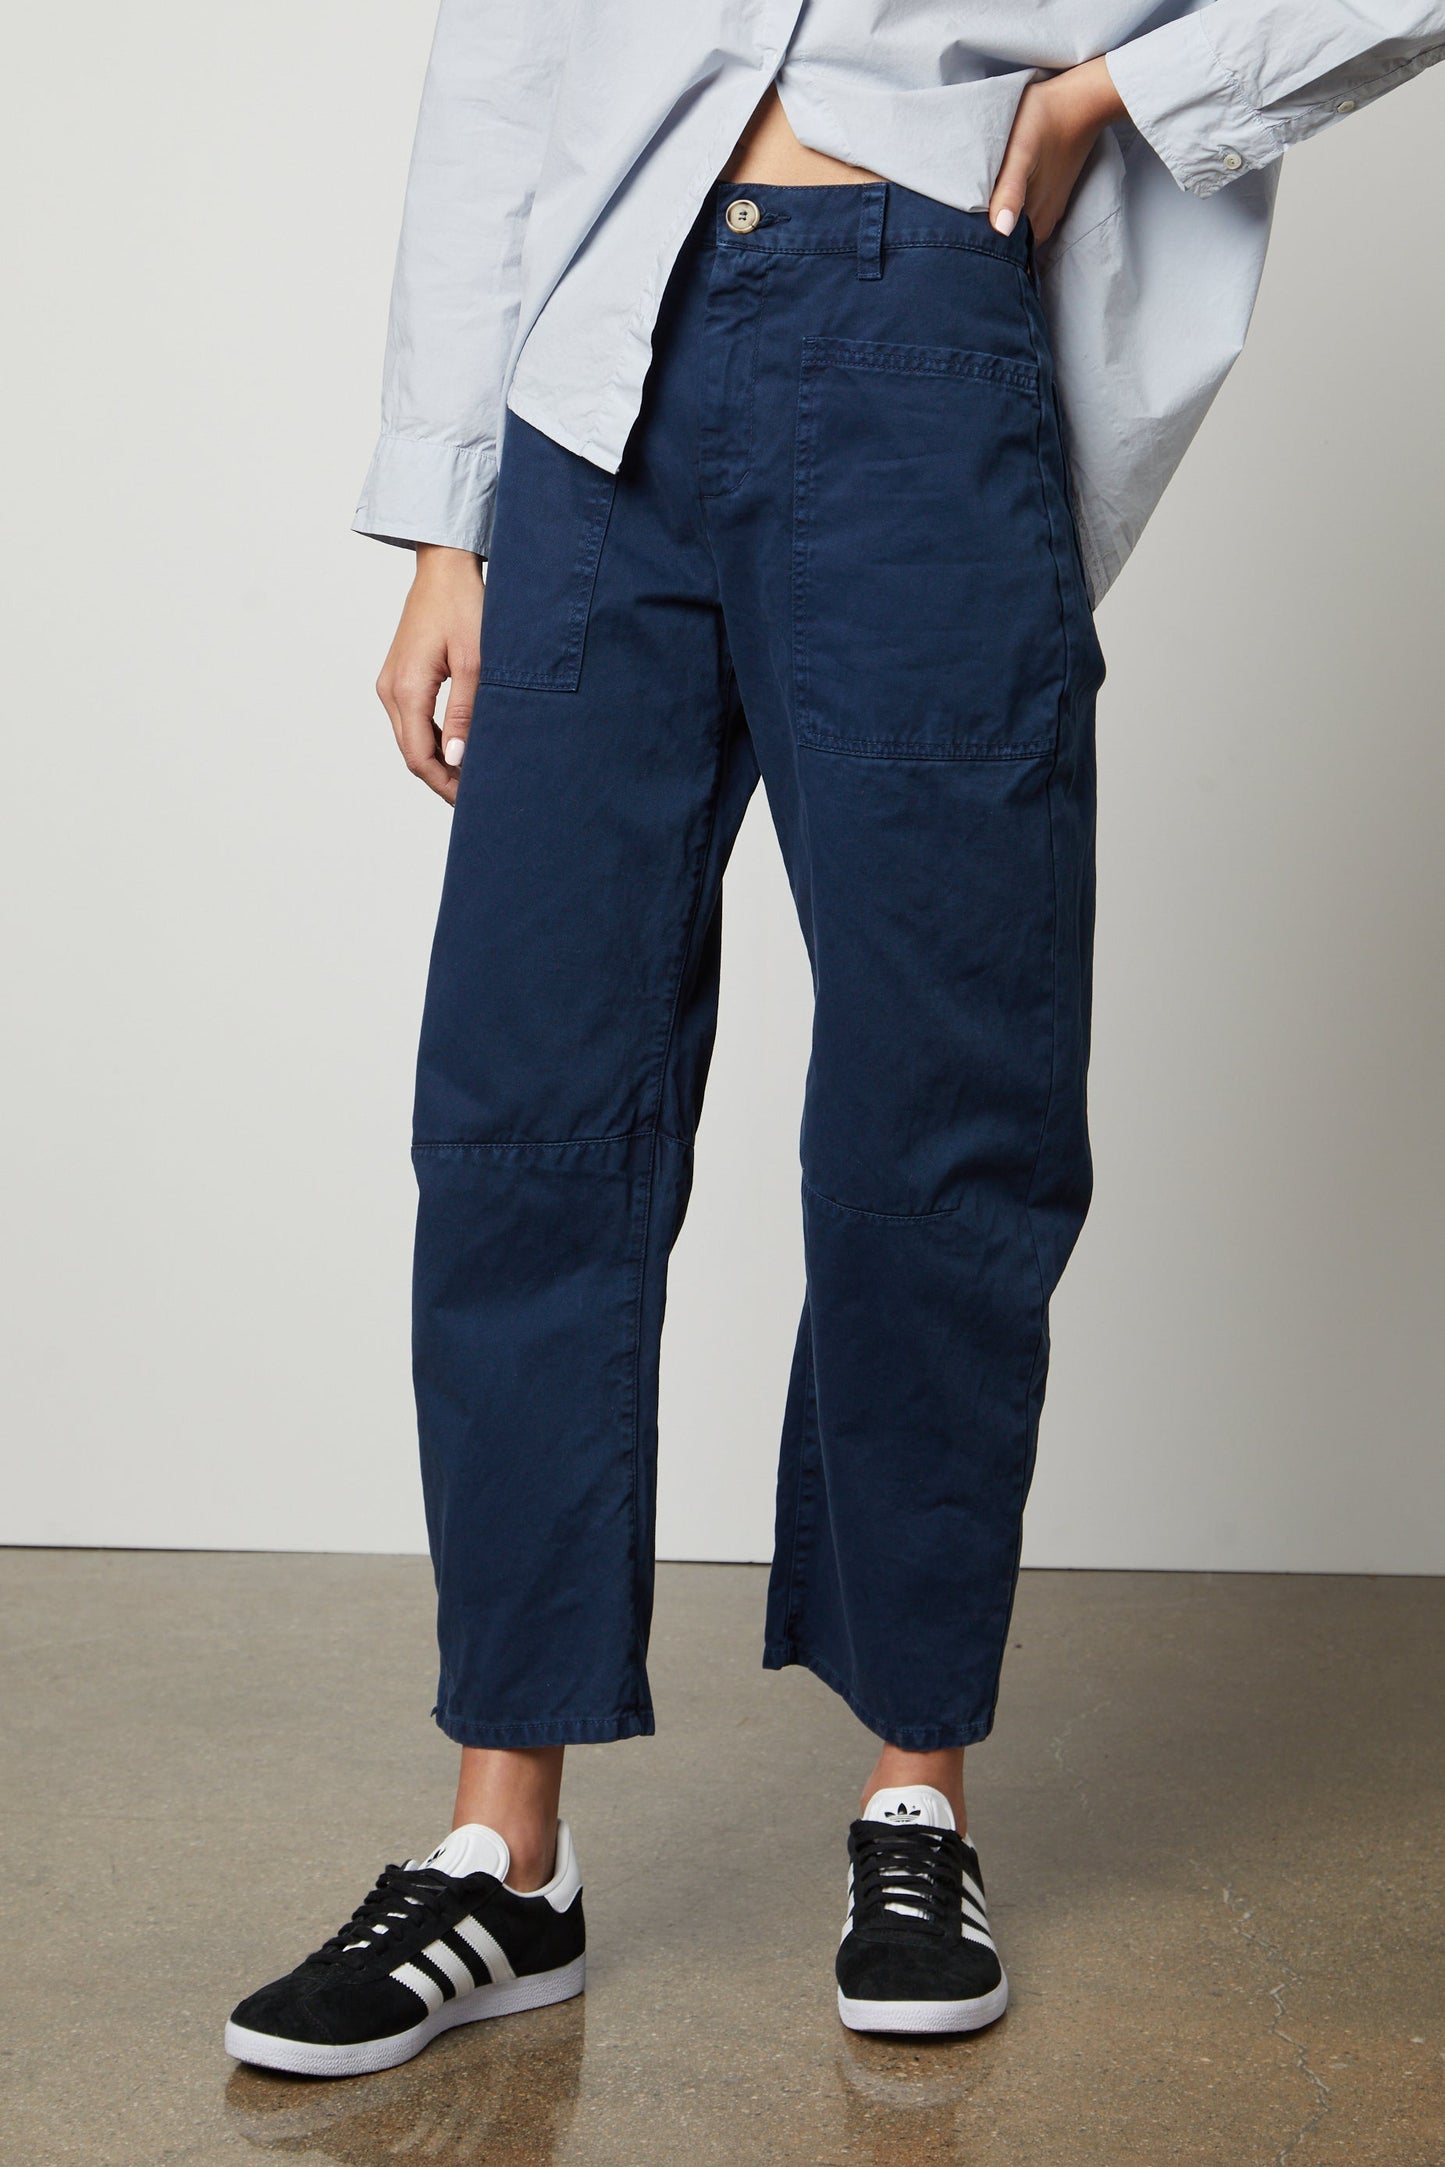 A woman wearing Velvet by Graham & Spencer BRYLIE SANDED TWILL UTILITY PANT and a white shirt.-36118556410049